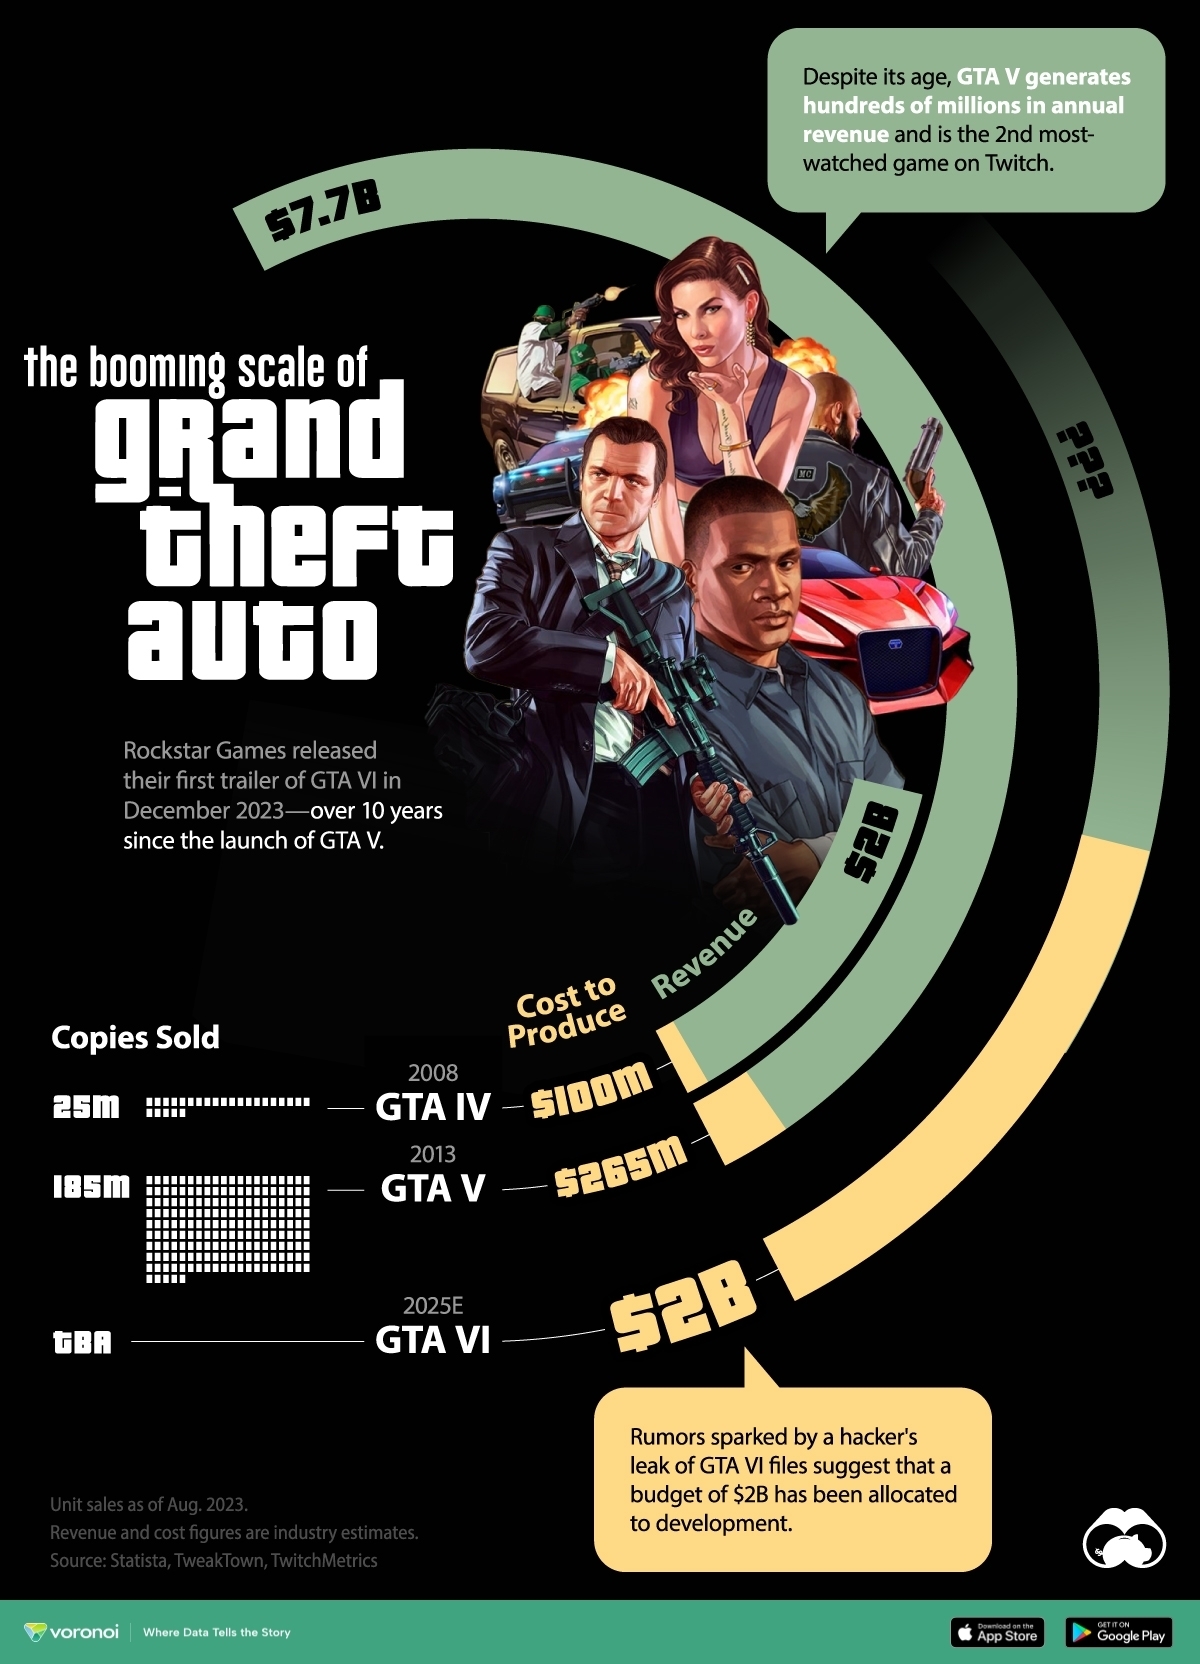 A chart comparing the GTA budget and revenue across three game titles.